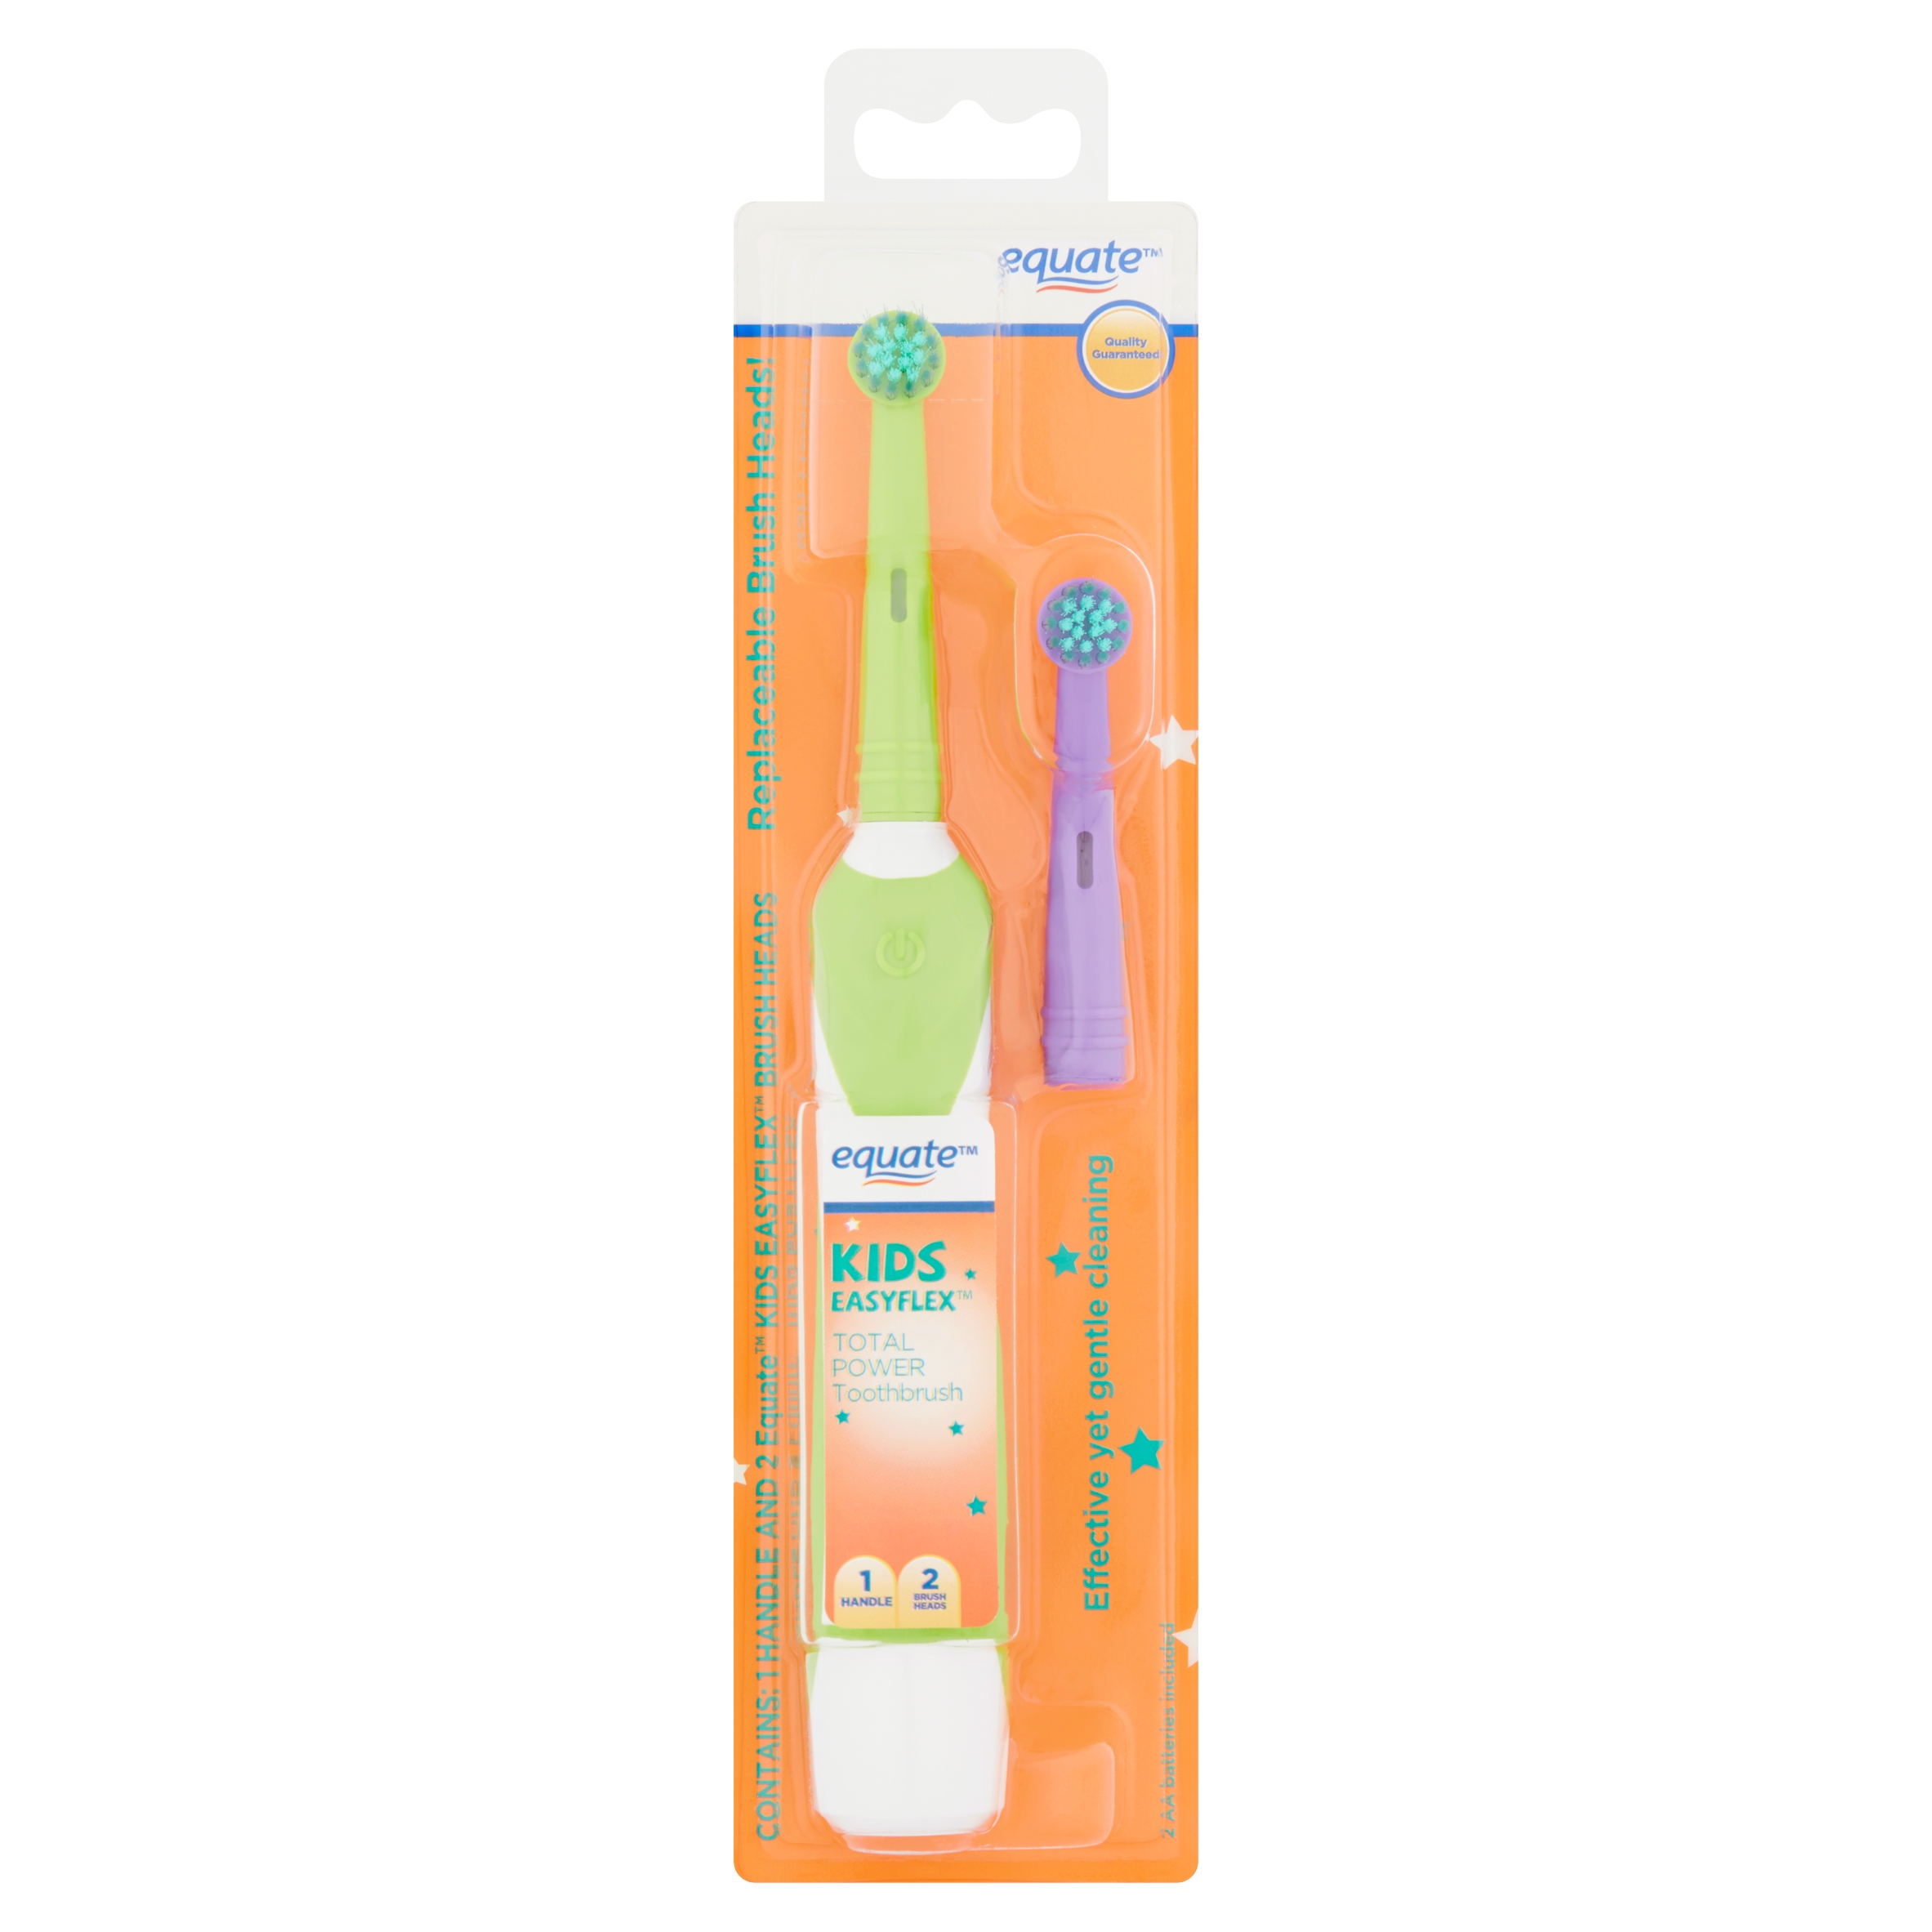 Equate Kids EasyFlex TotalPower Toothbrush with Replacement Brush Head, Battery Powered - image 1 of 12